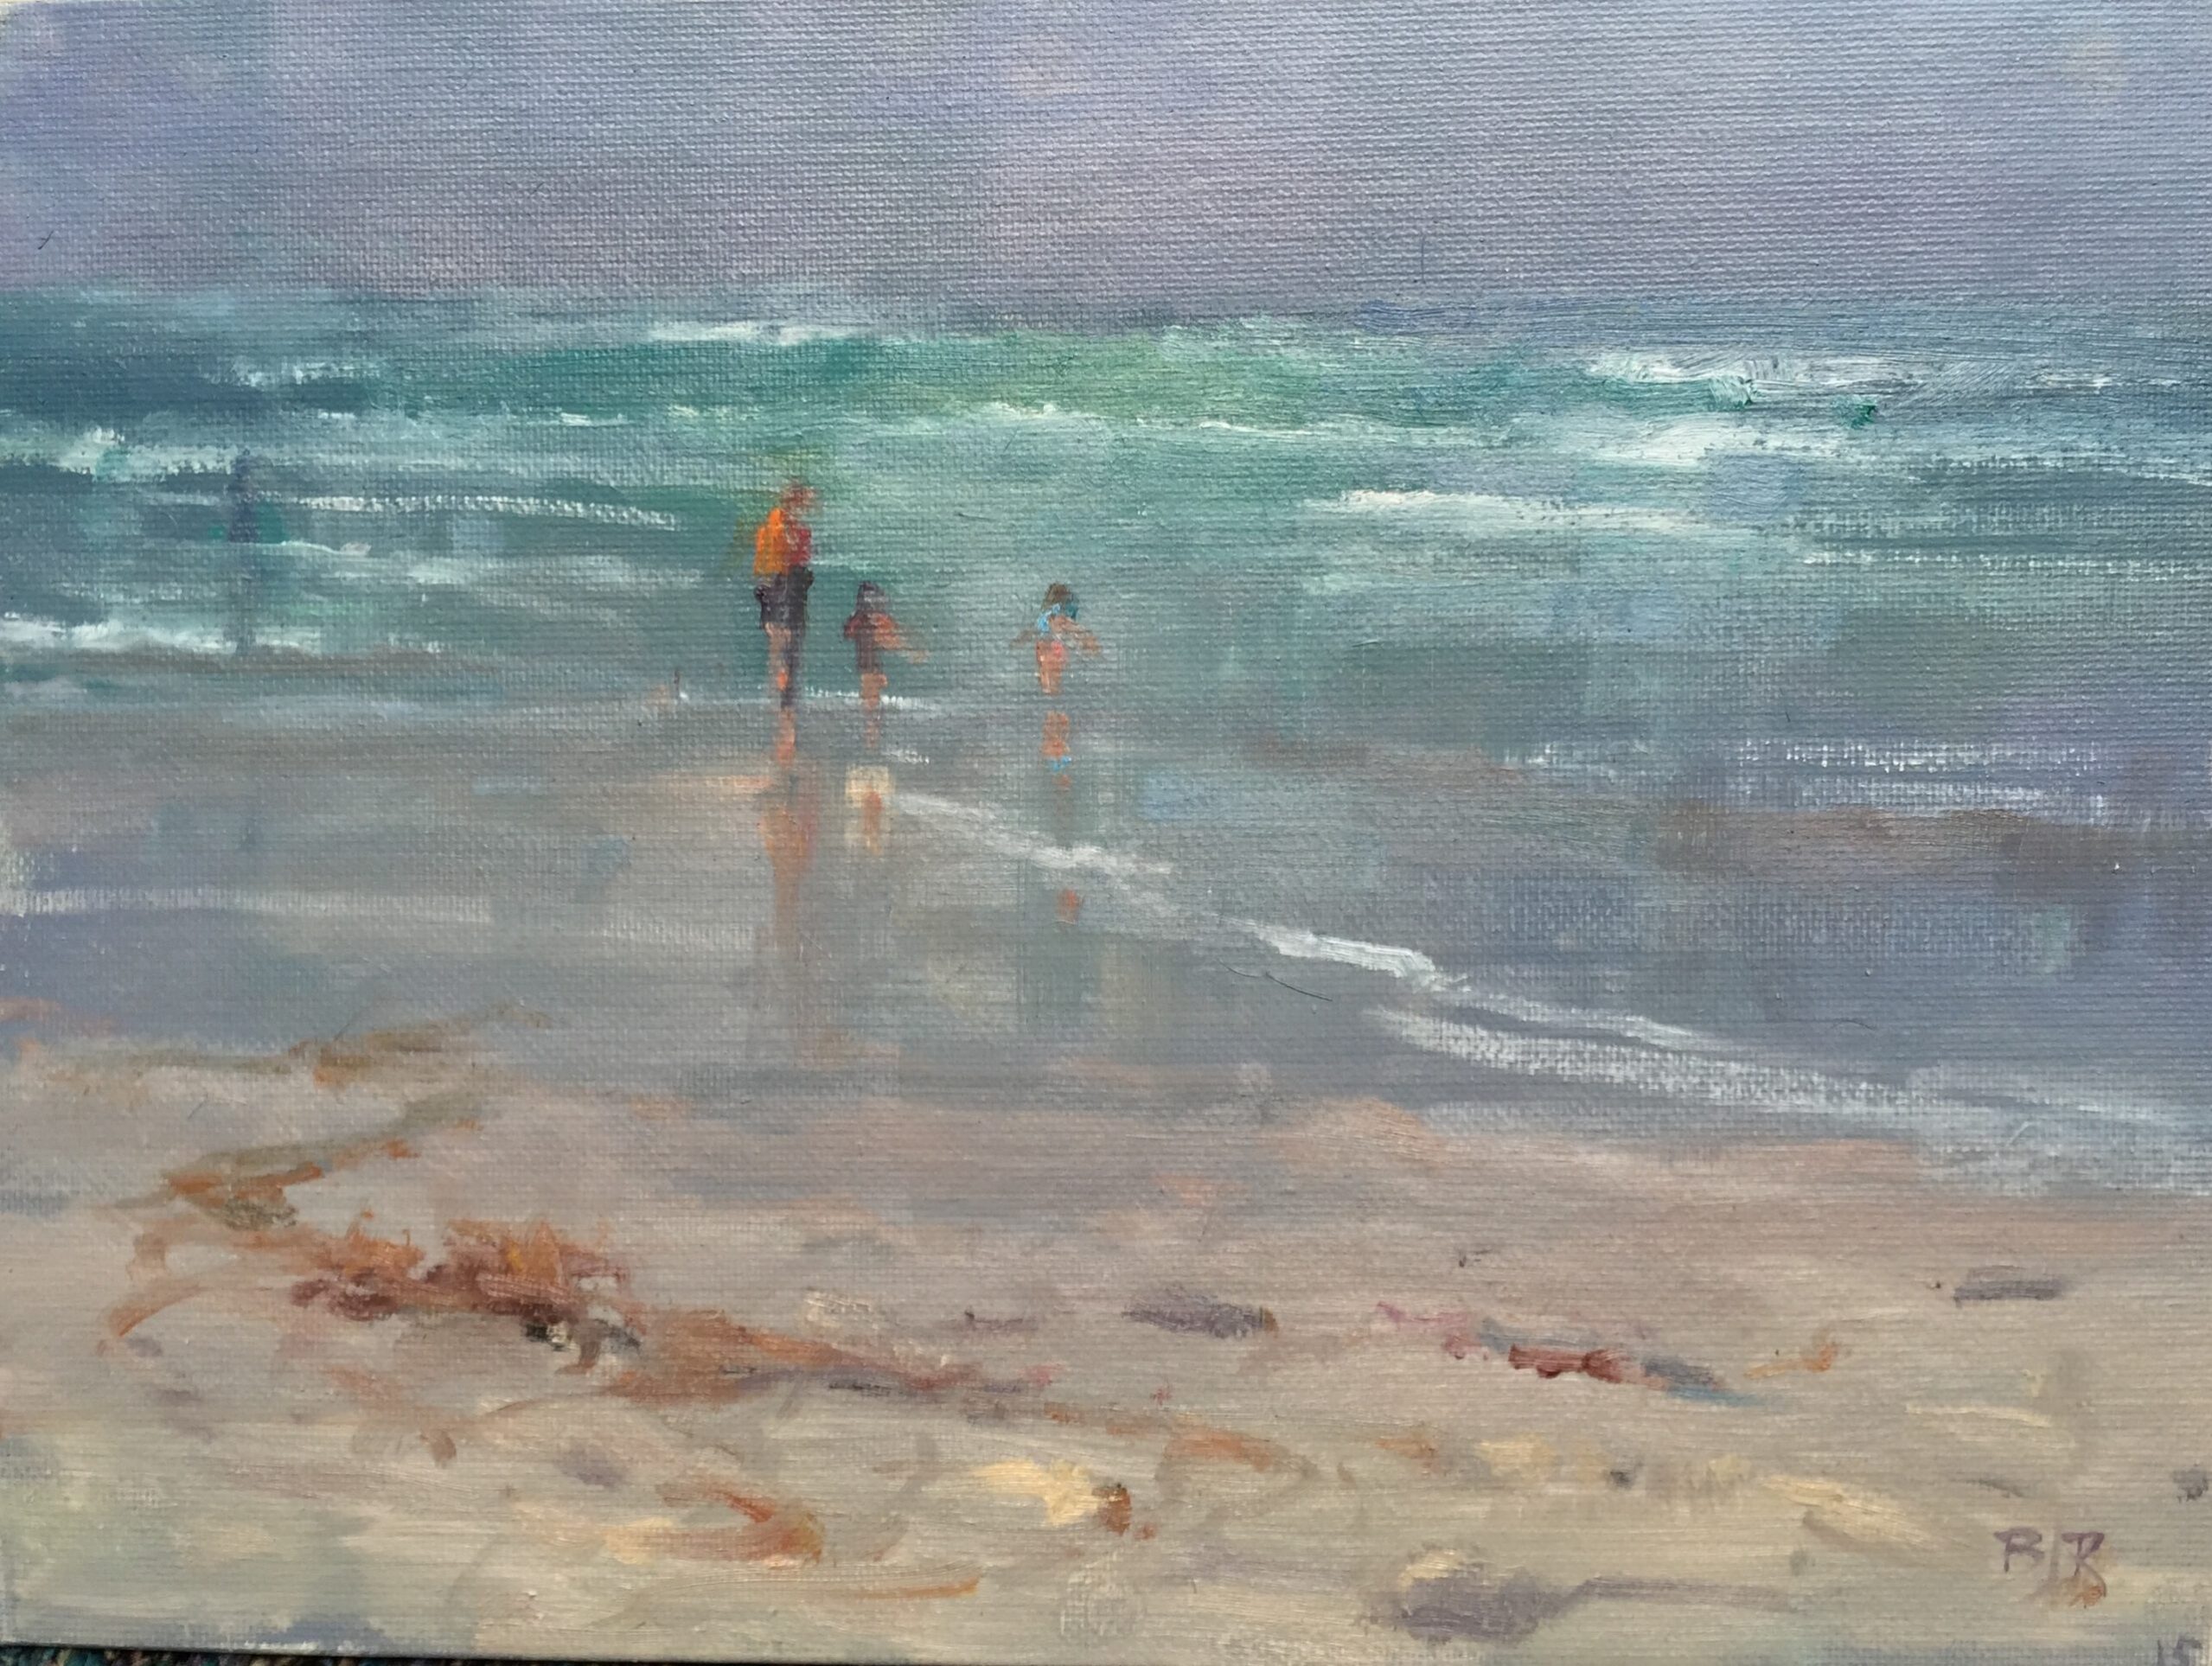 Asilomar Beach Holiday 1 - 9in x 12in - Oil on Canvas - 2015